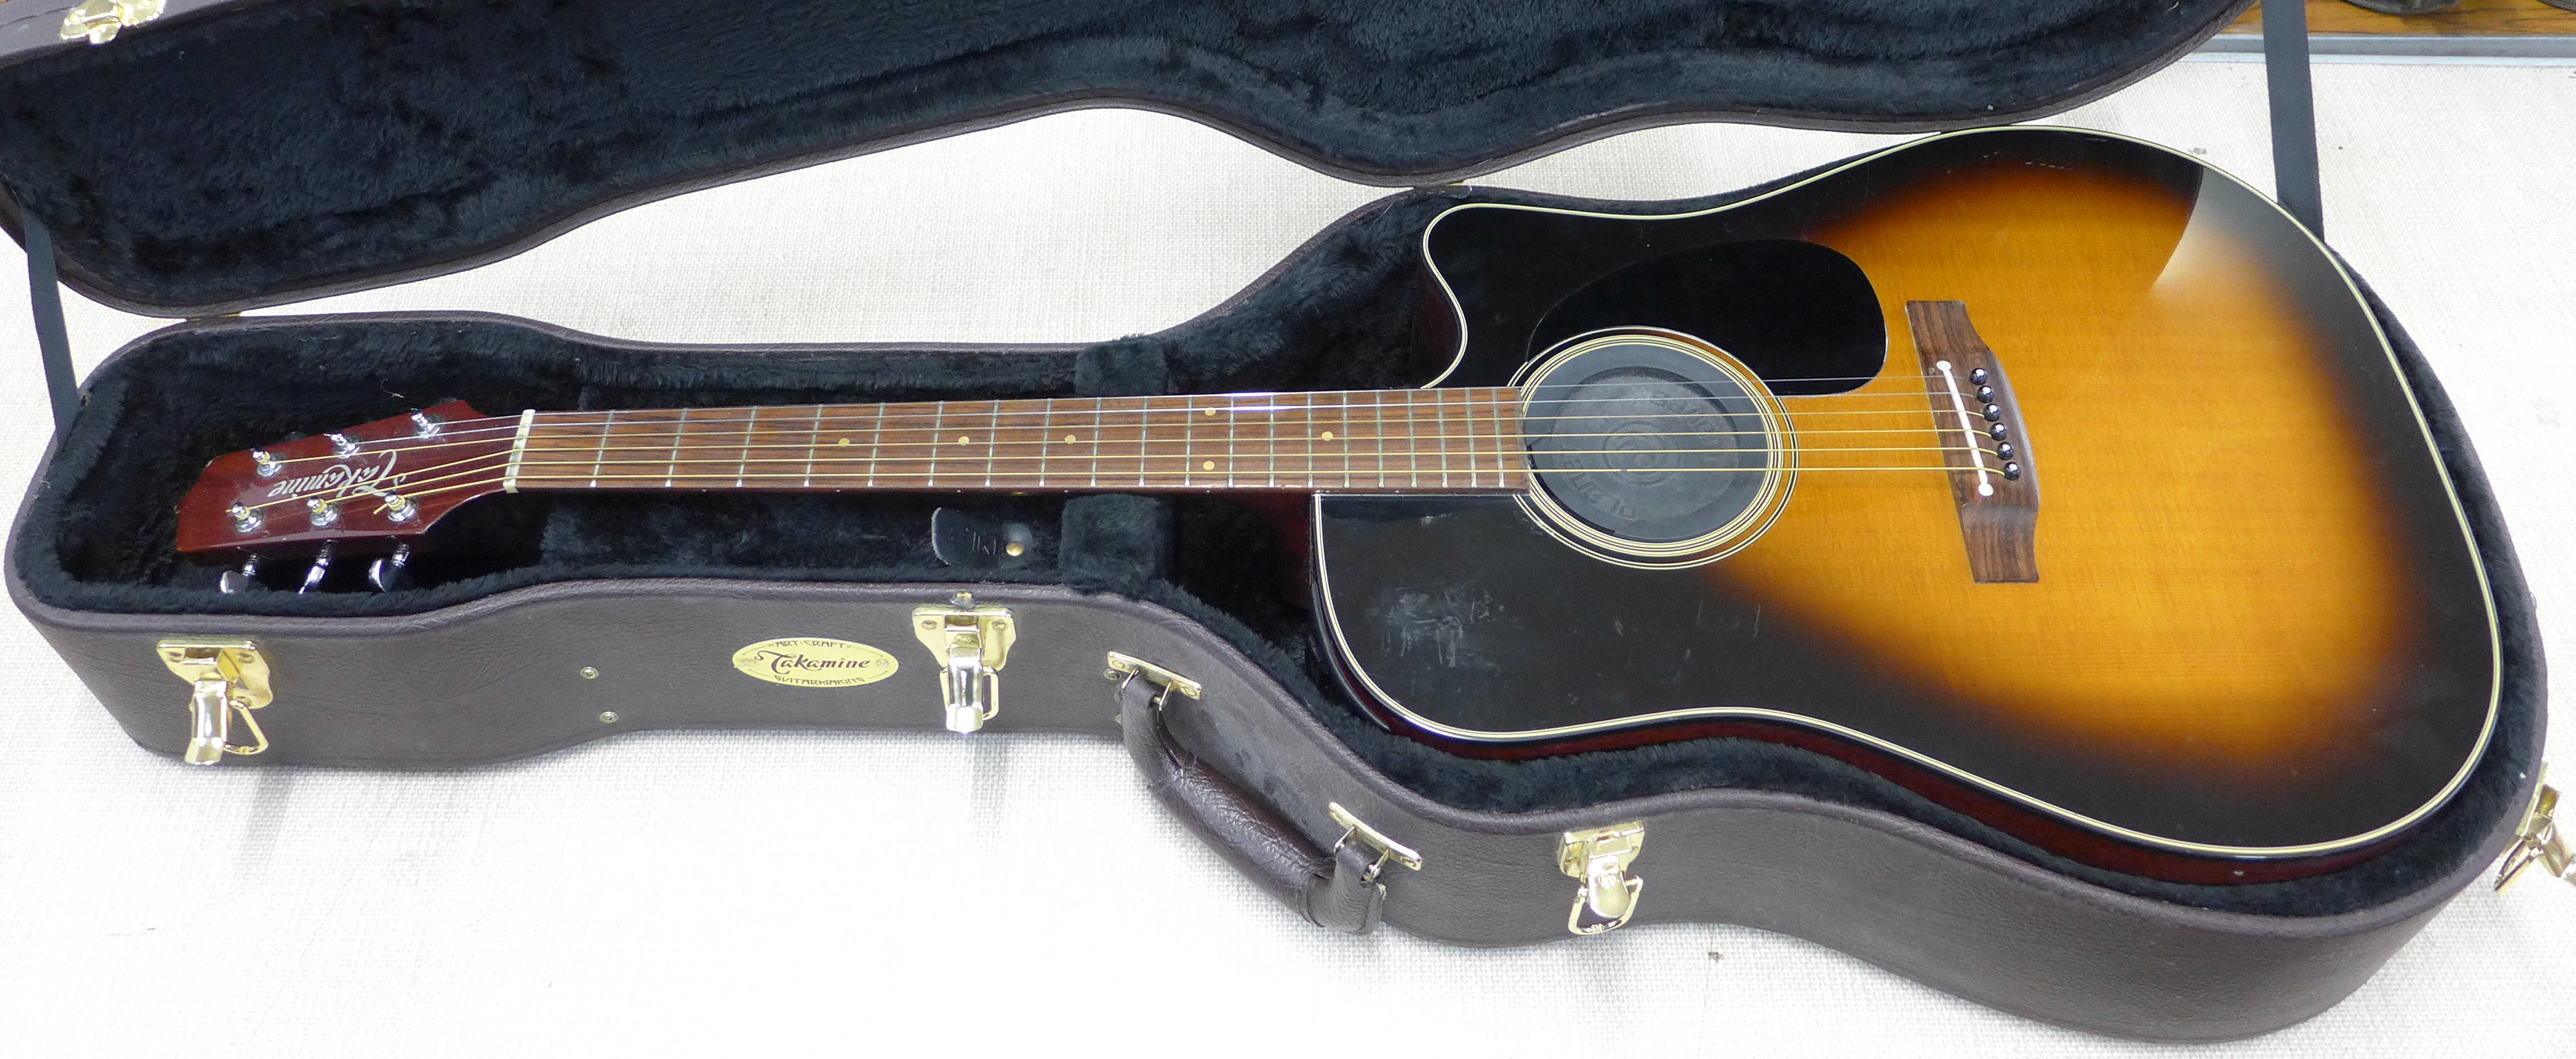 A Takamine classical guitar with a hard case and CT-4BII active pre-amp - Image 8 of 10